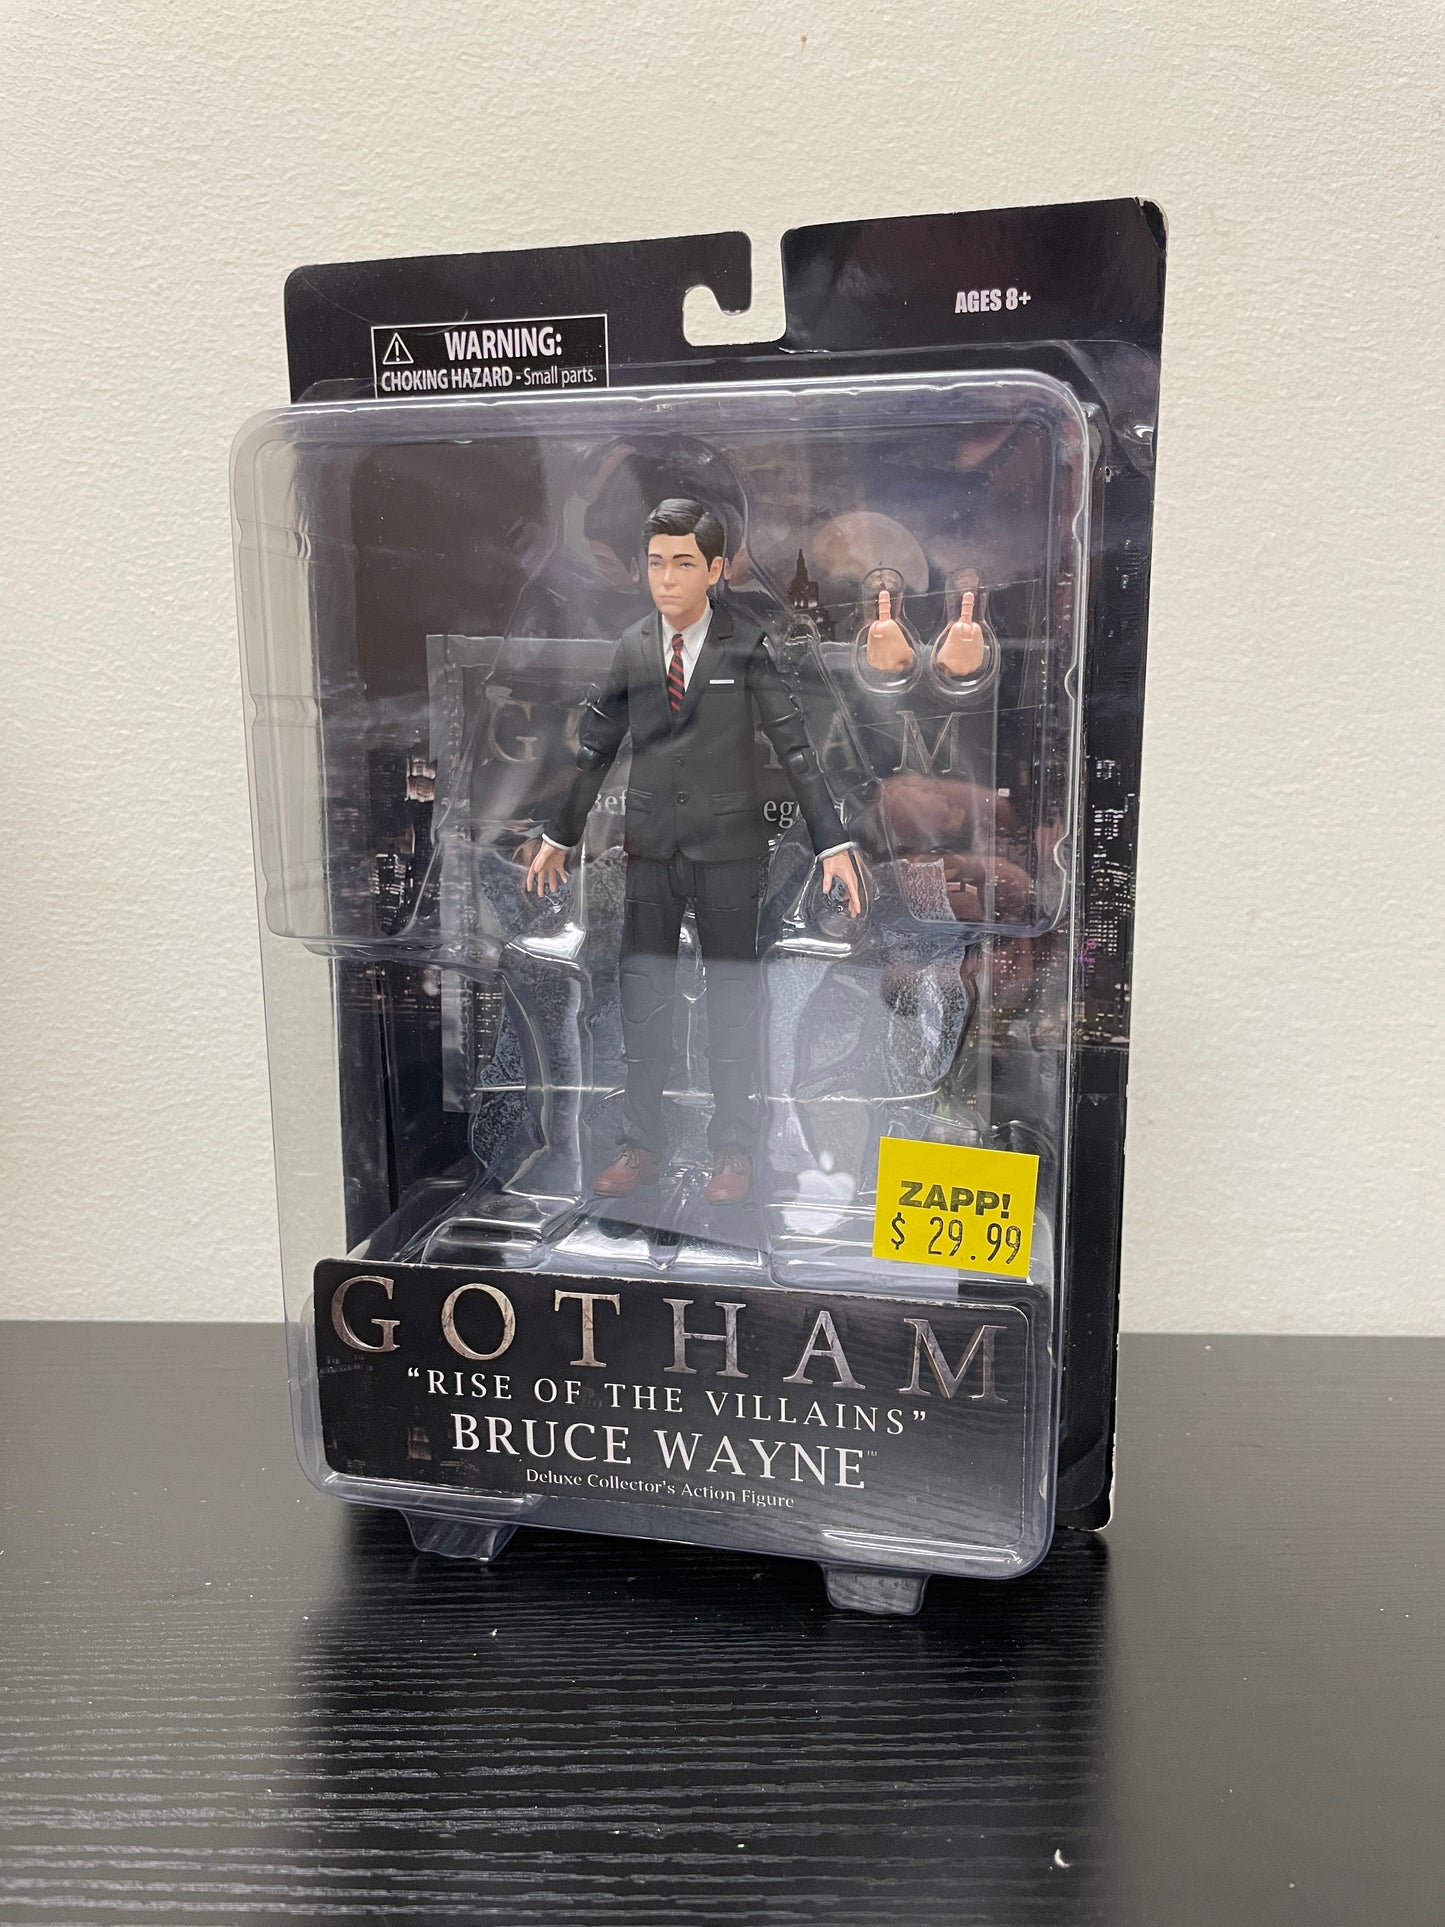 Diamond Select Toys Gotham "Rise of the Villians" Bruce Wayne Deluxe Collector's Figure